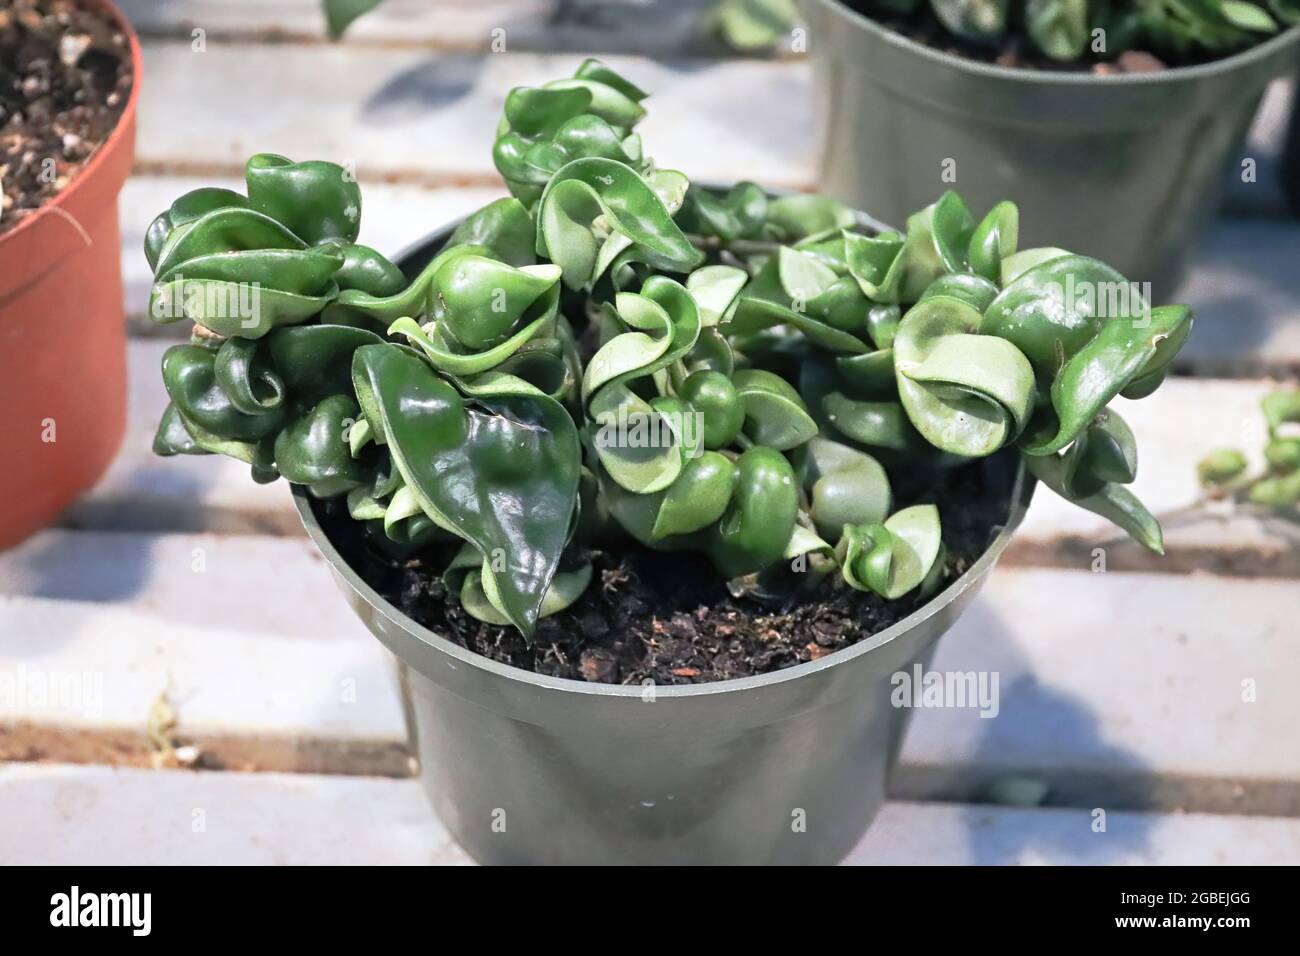 A Hindu Rope Hoya plant in a green pot Stock Photo